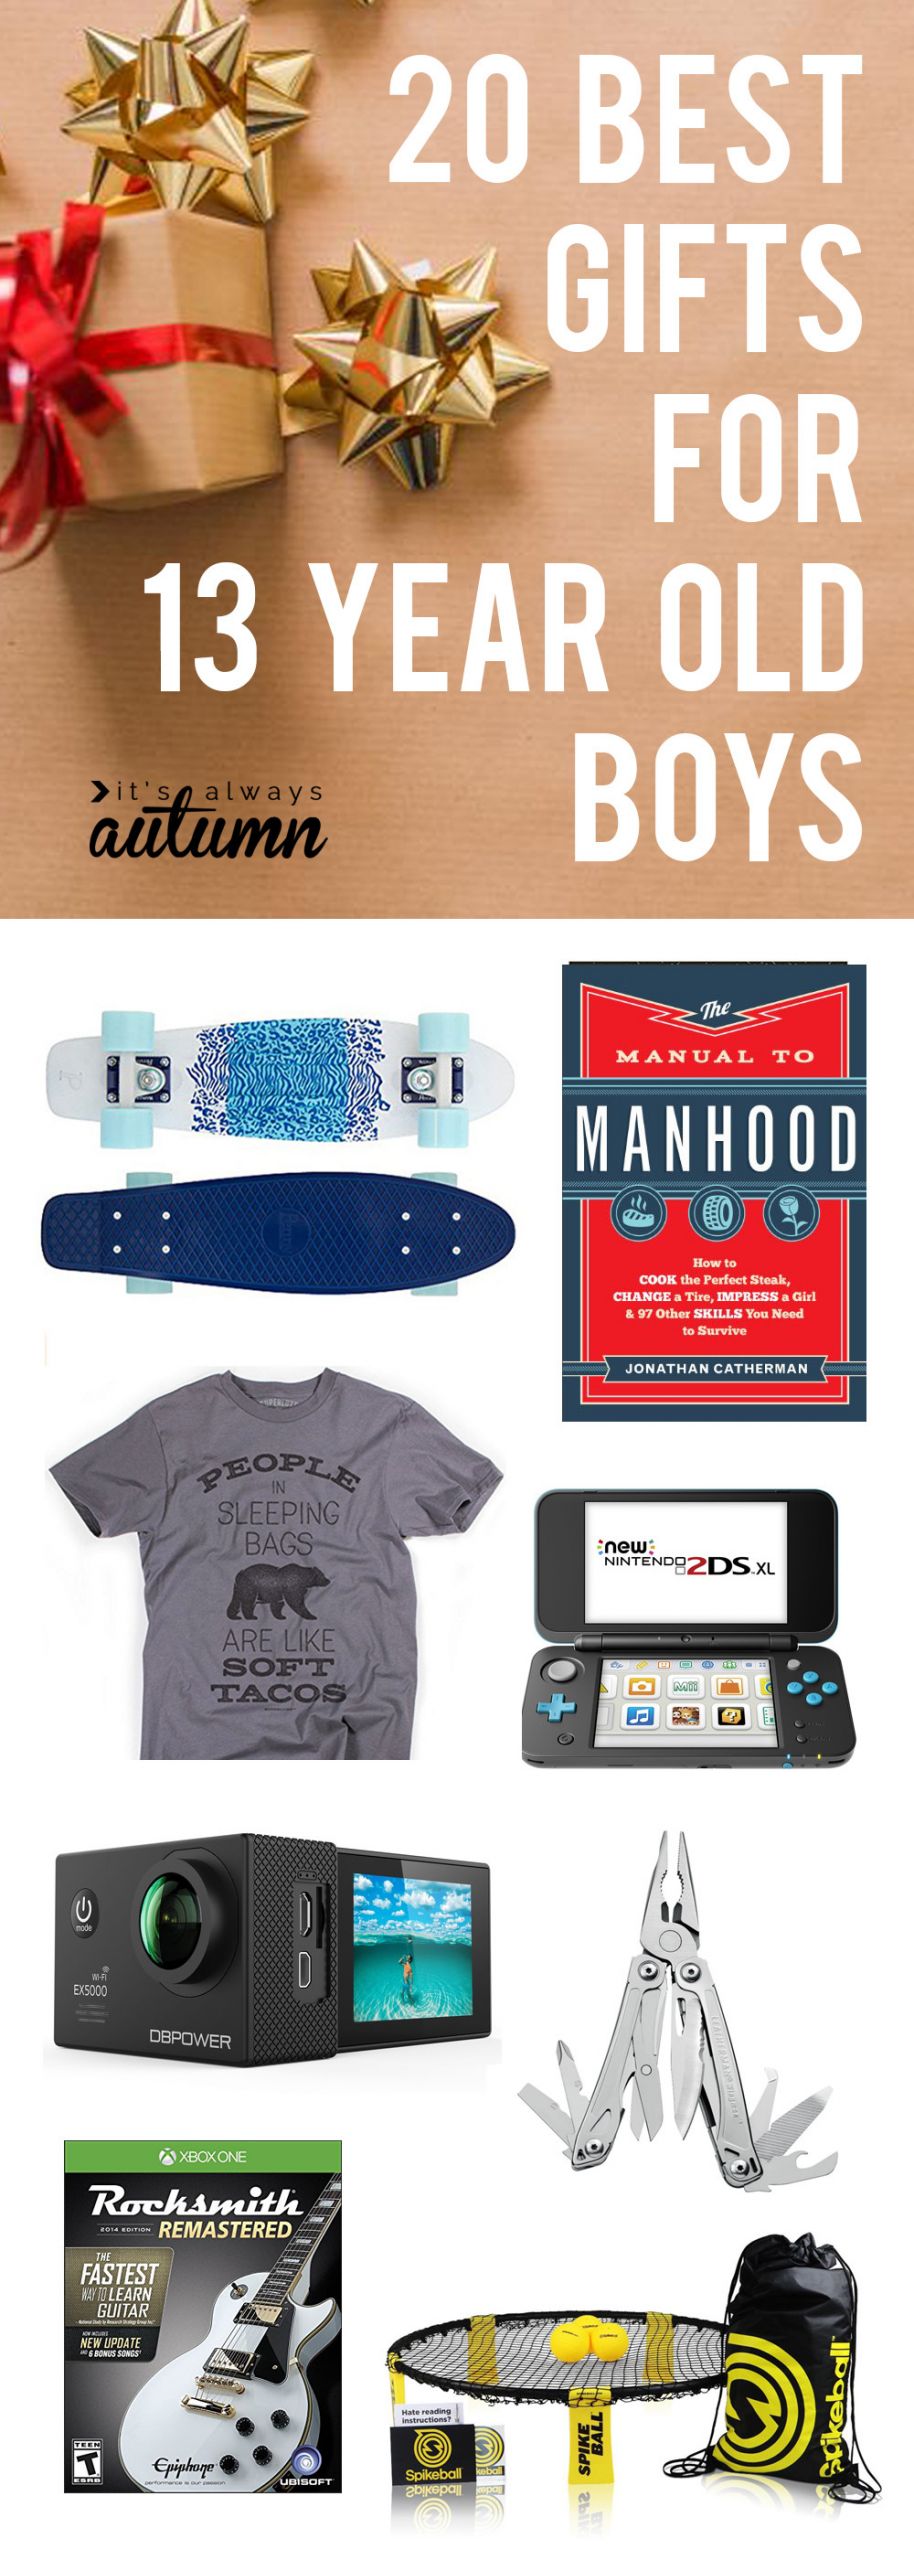 Gift Ideas For 13 Year Old Boys
 best Christmas ts for 13 year old boys It s Always Autumn